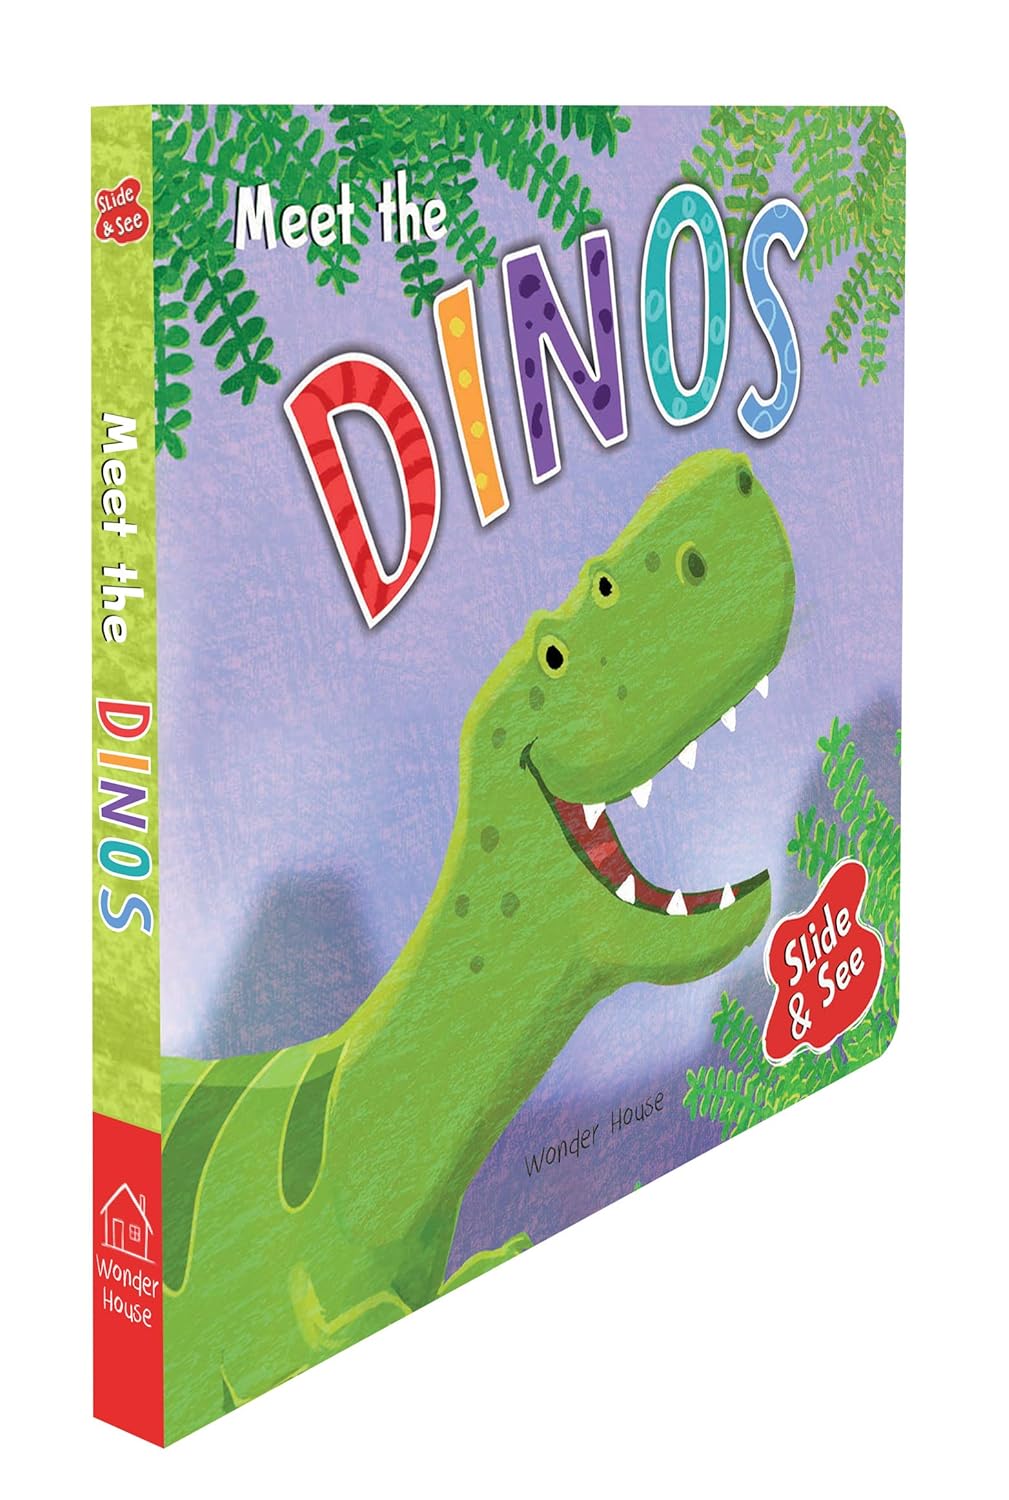 Slide And See - Meet The Dinos : Board Book